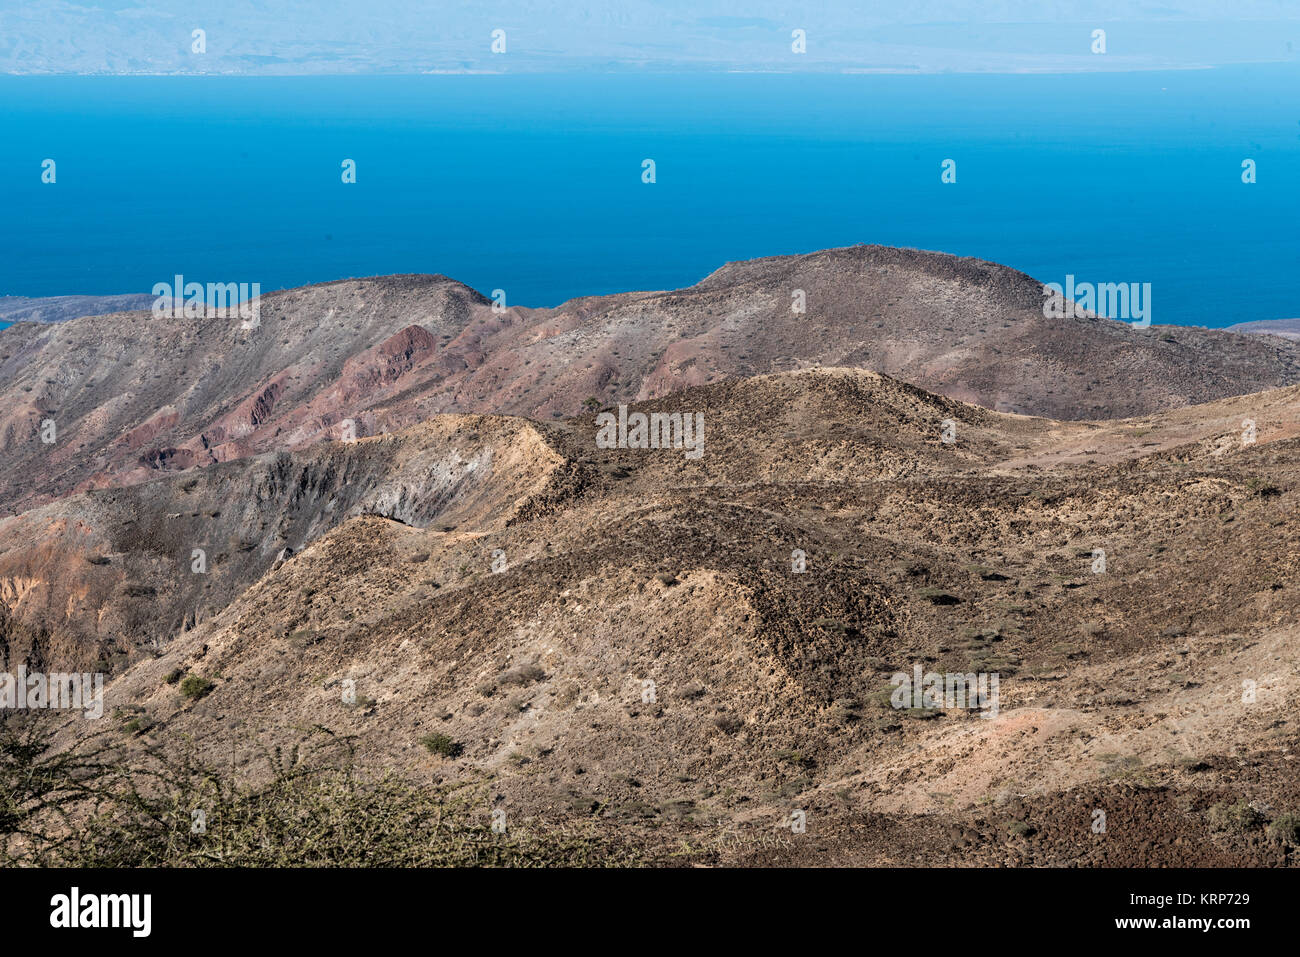 A view of the Gulf of Tadjoura from Arta, Djibouti, East Africa - Mountains of Arta Stock Photo